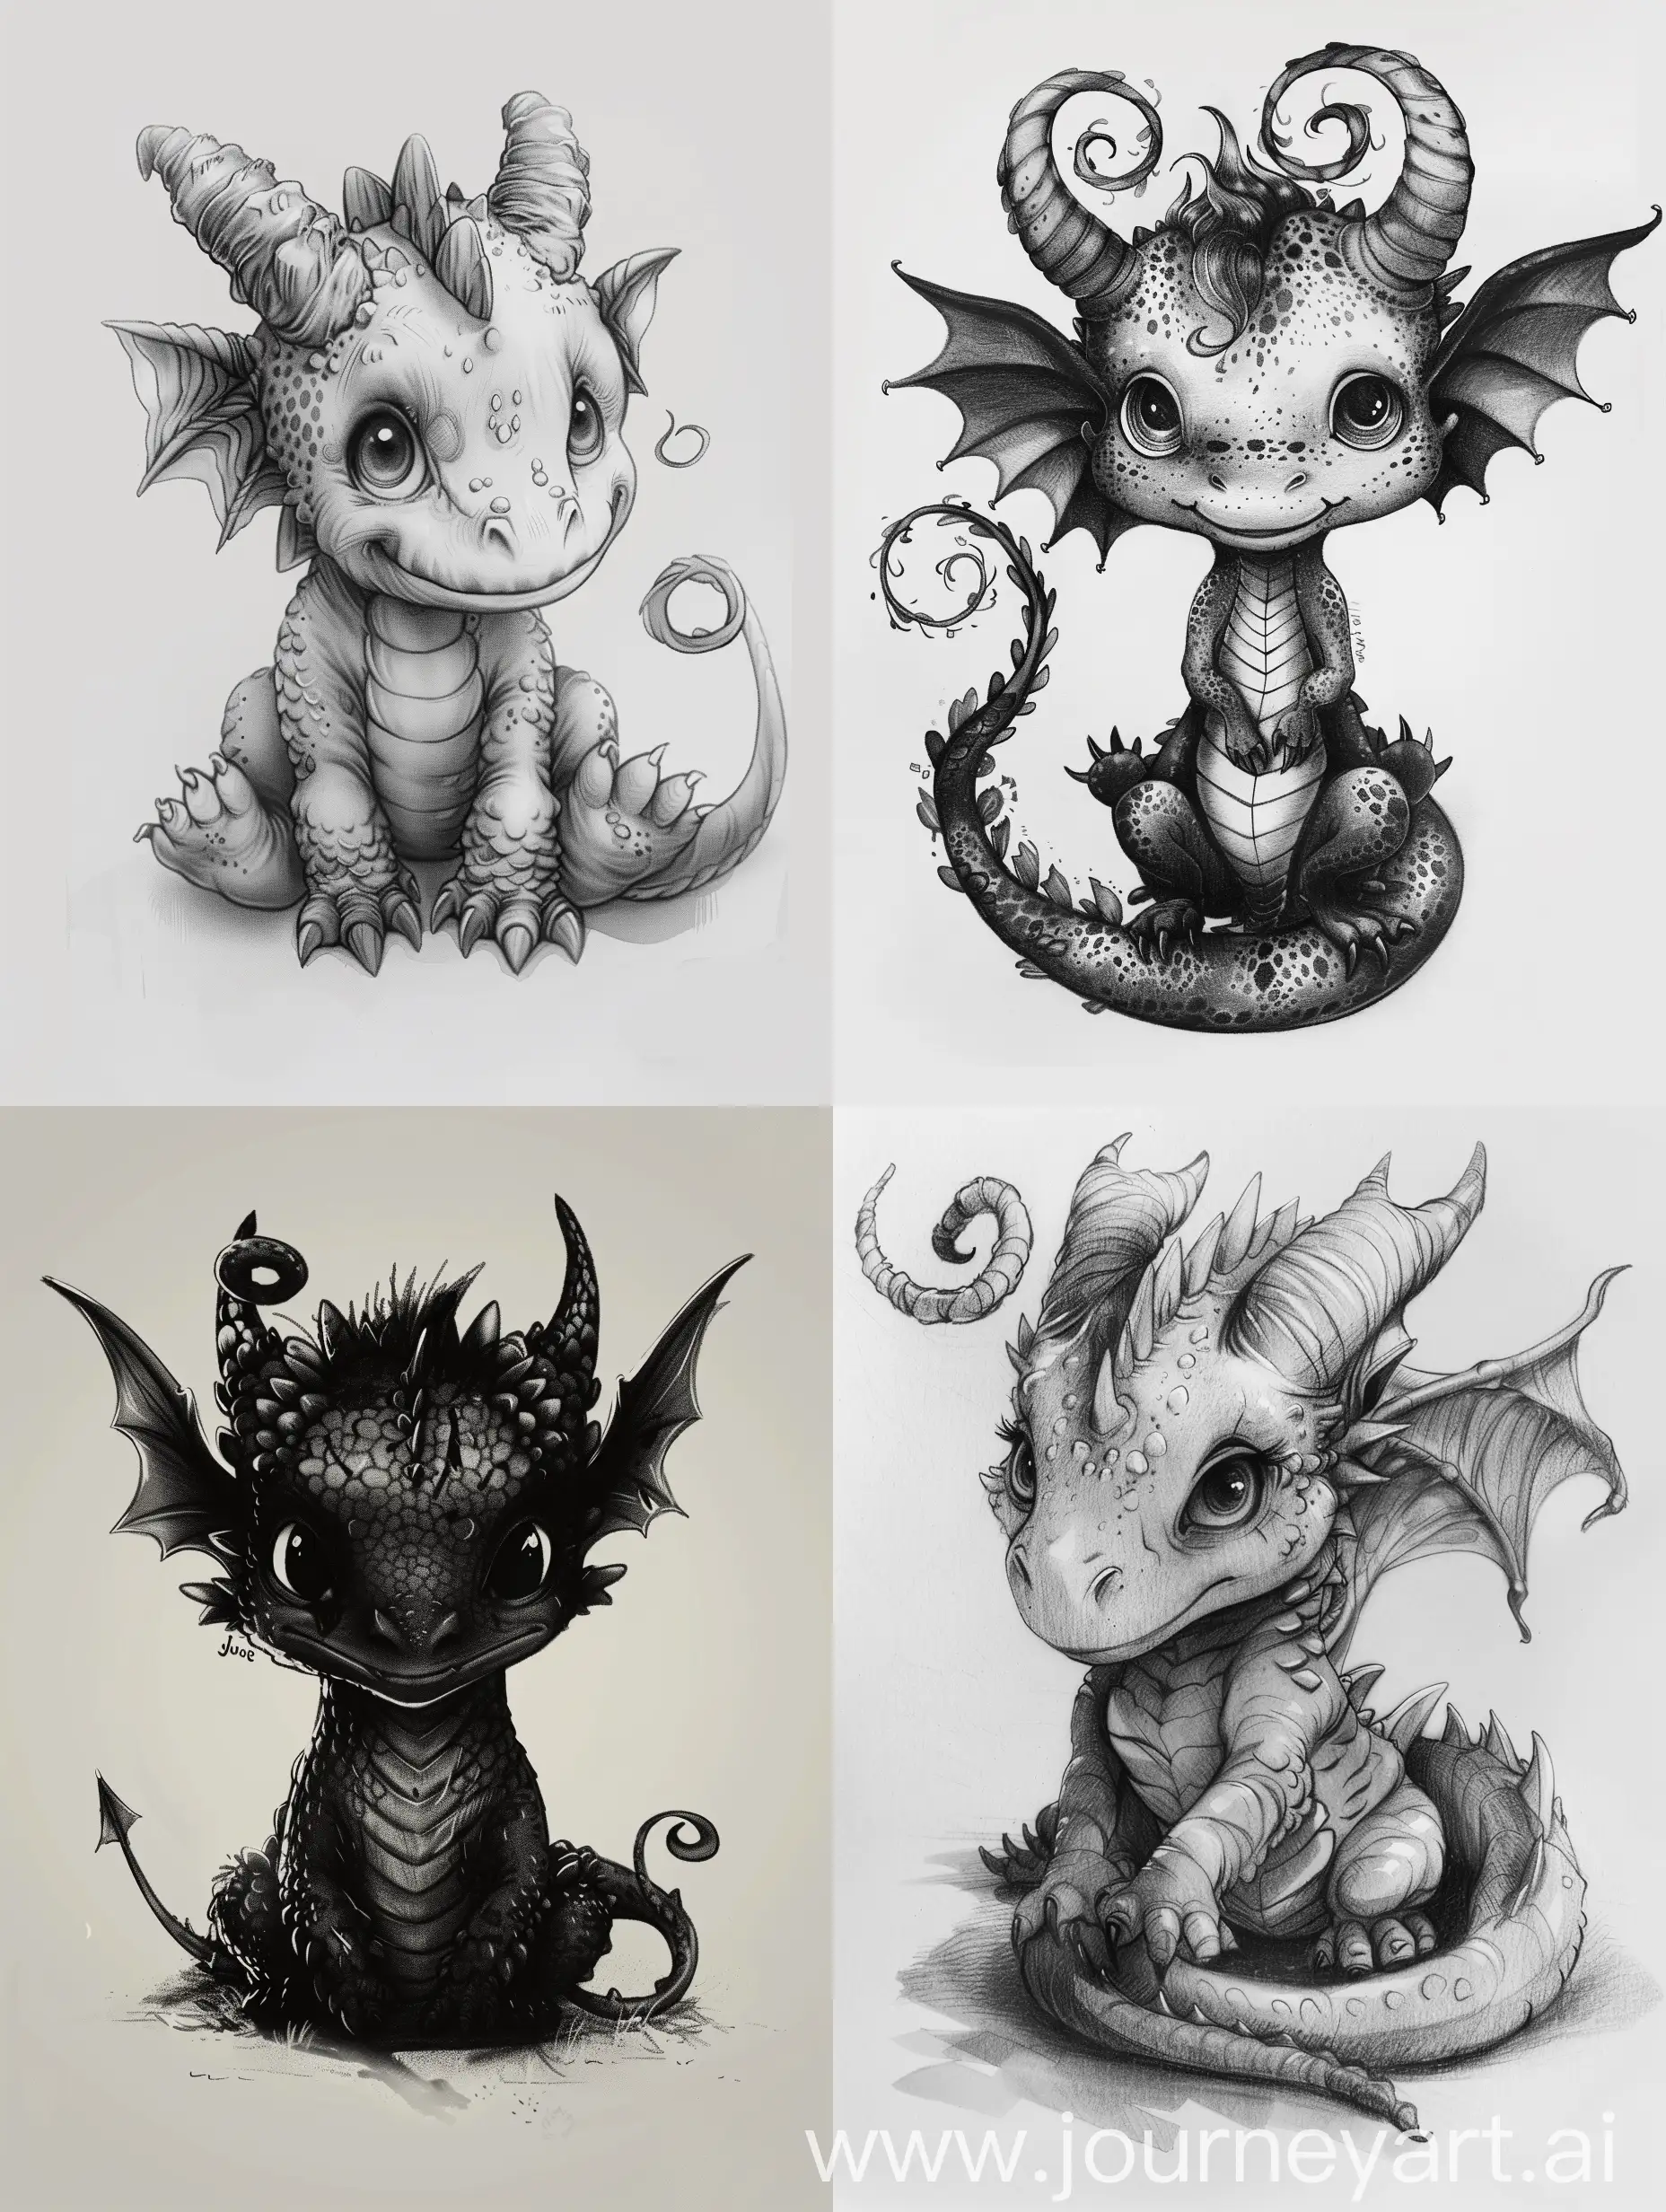 Adorable-6YearOld-Manga-Style-Dragon-with-Curled-Horns